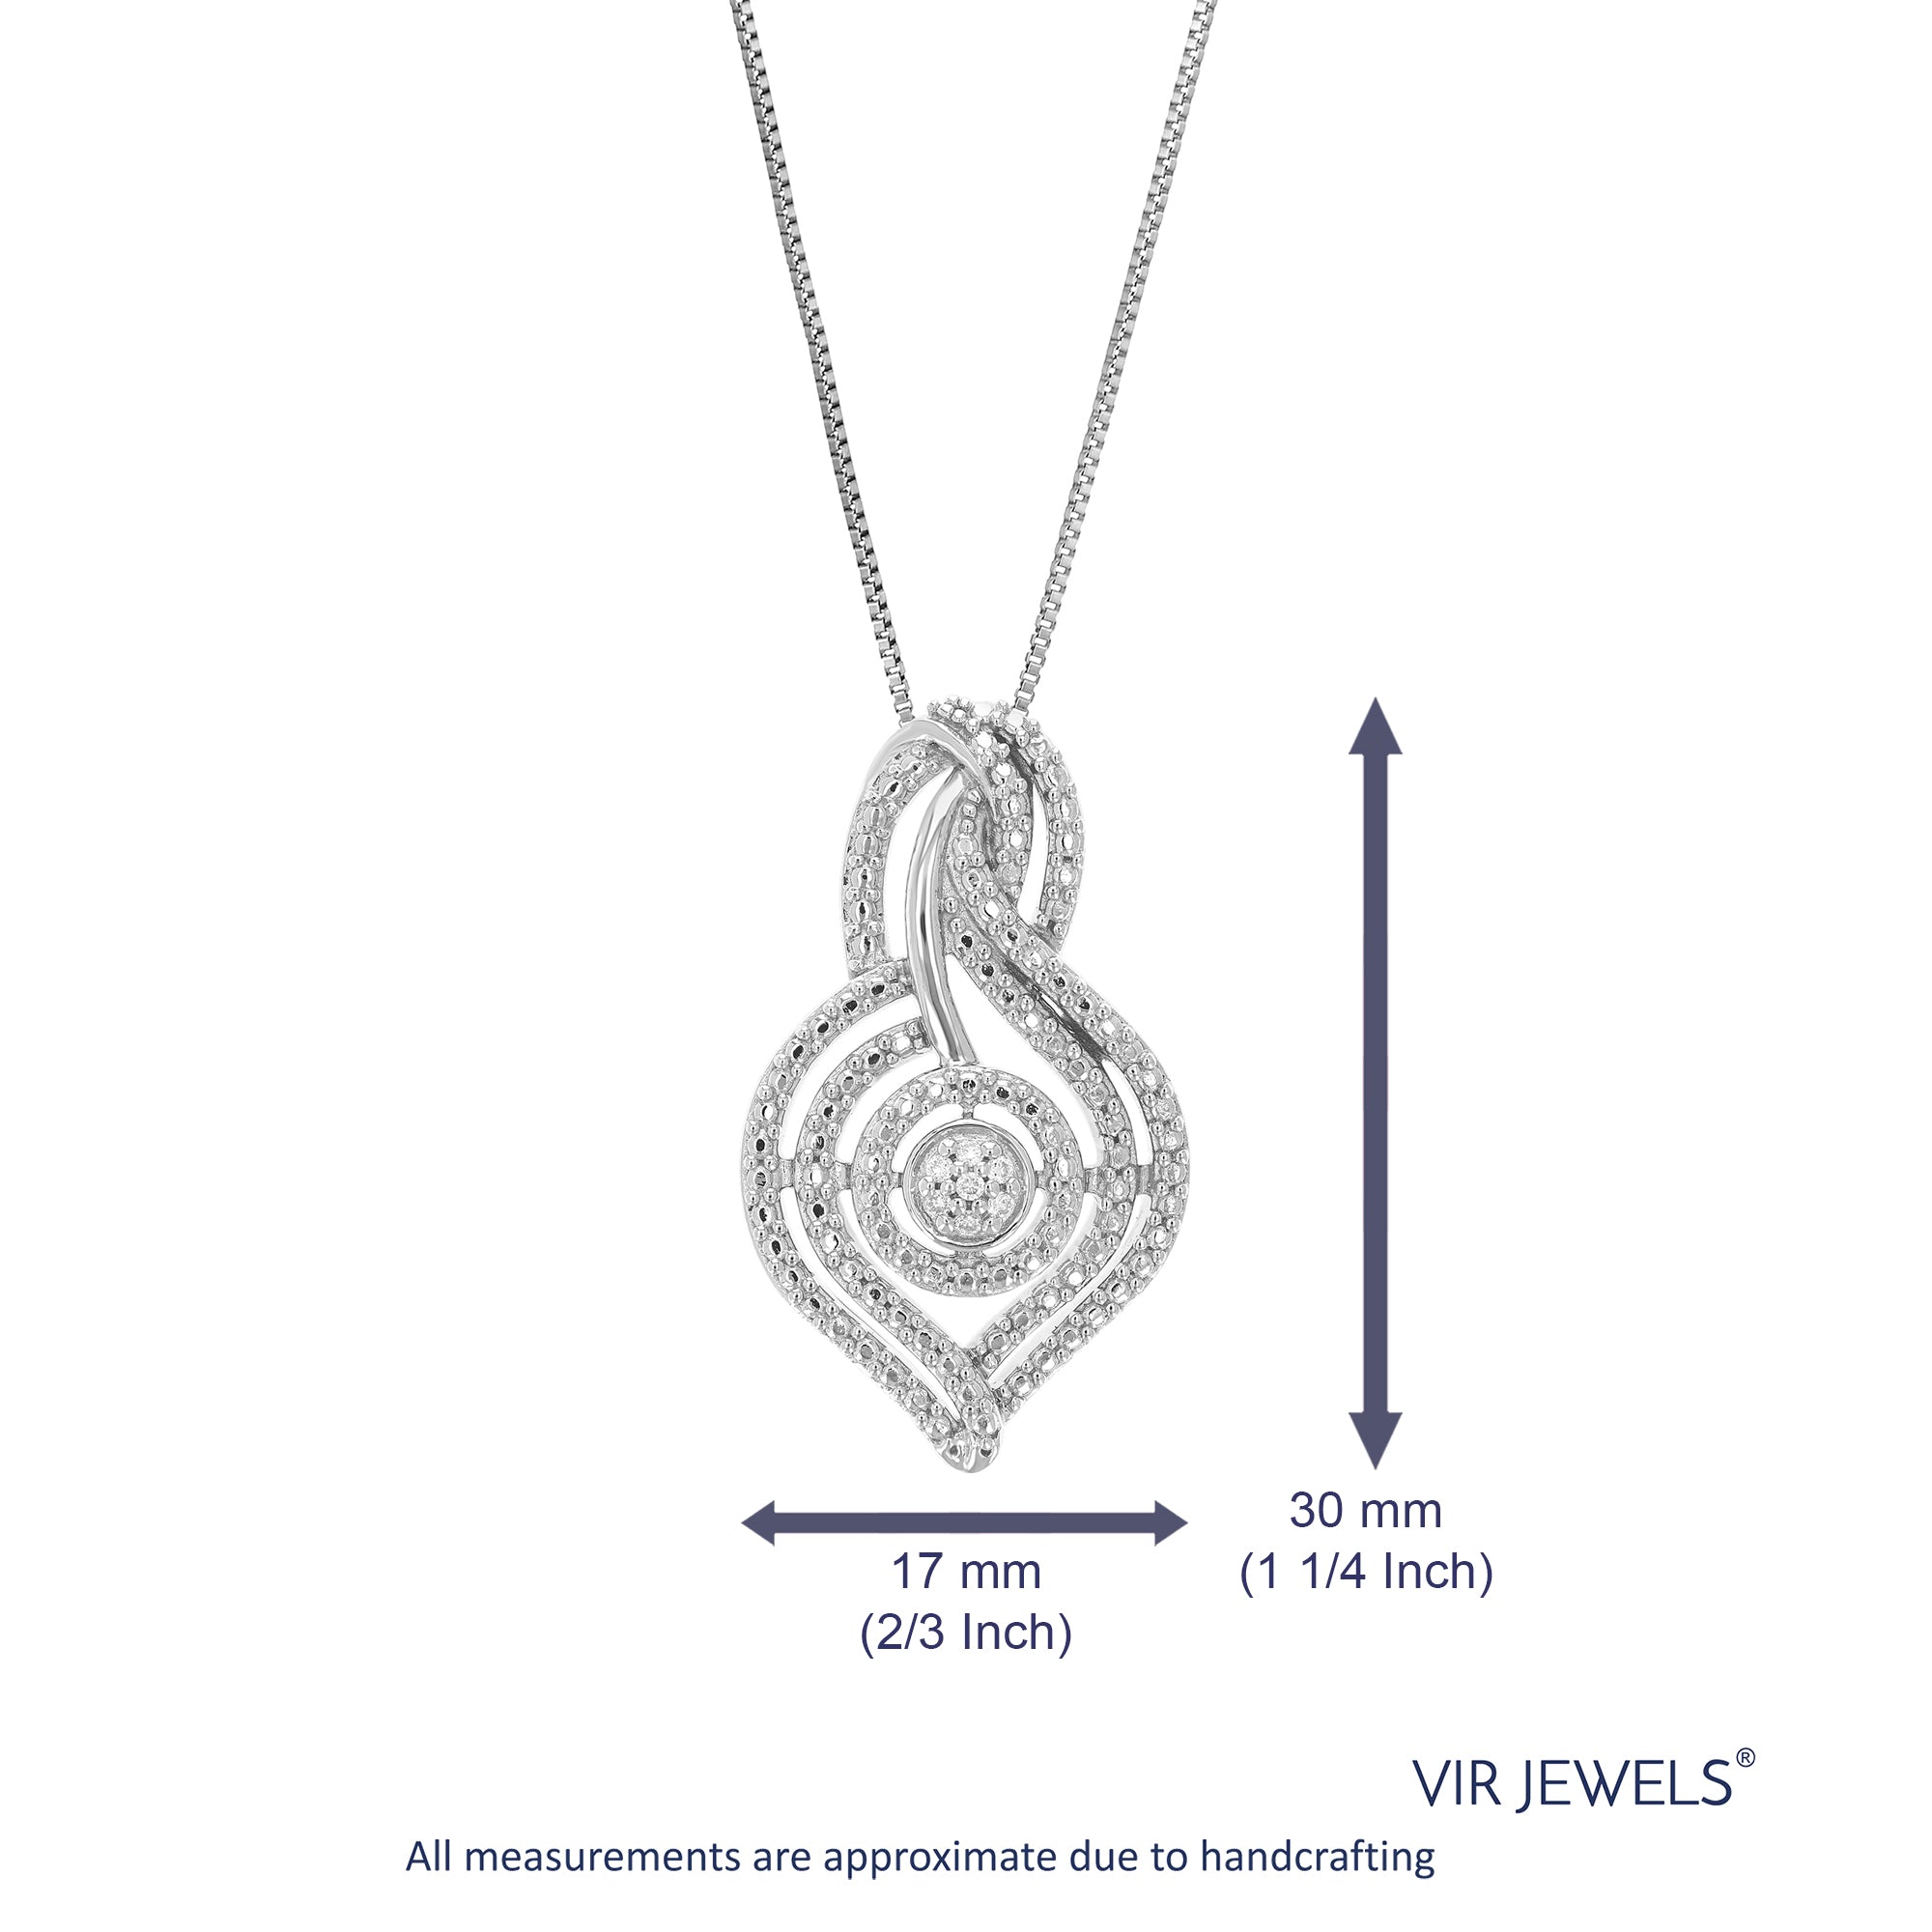 1/20 cttw Diamond Pendant Necklace for Women, Lab Grown Diamond Cluster Pendant Necklace in .925 Sterling Silver with Chain, Size 1 1/4 Inch